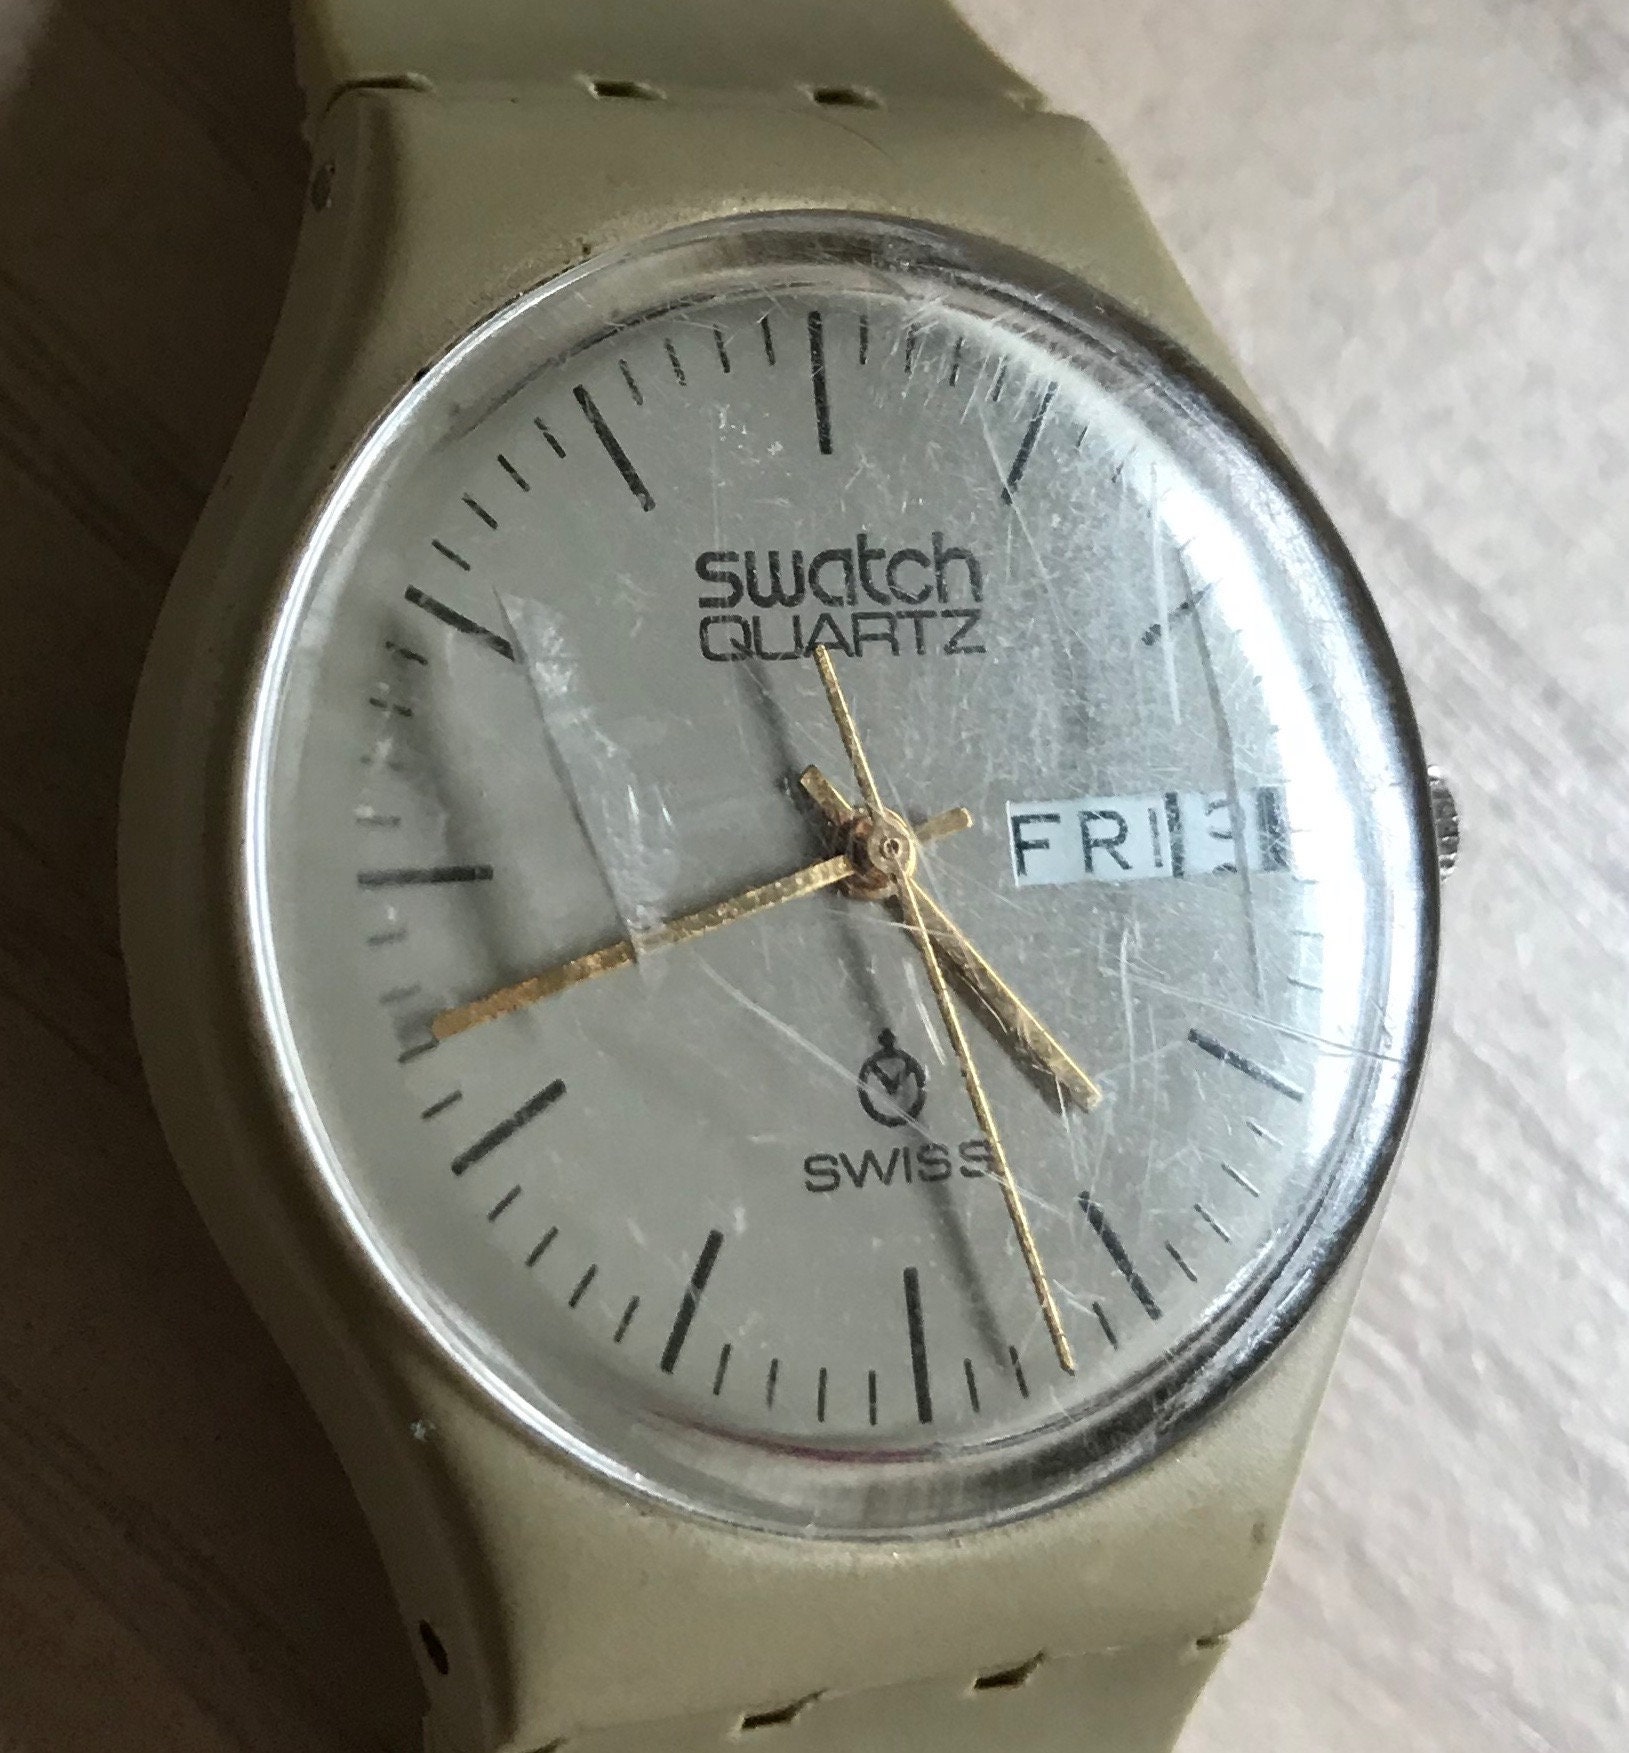 The new Swatch '1983' watches are made from plants